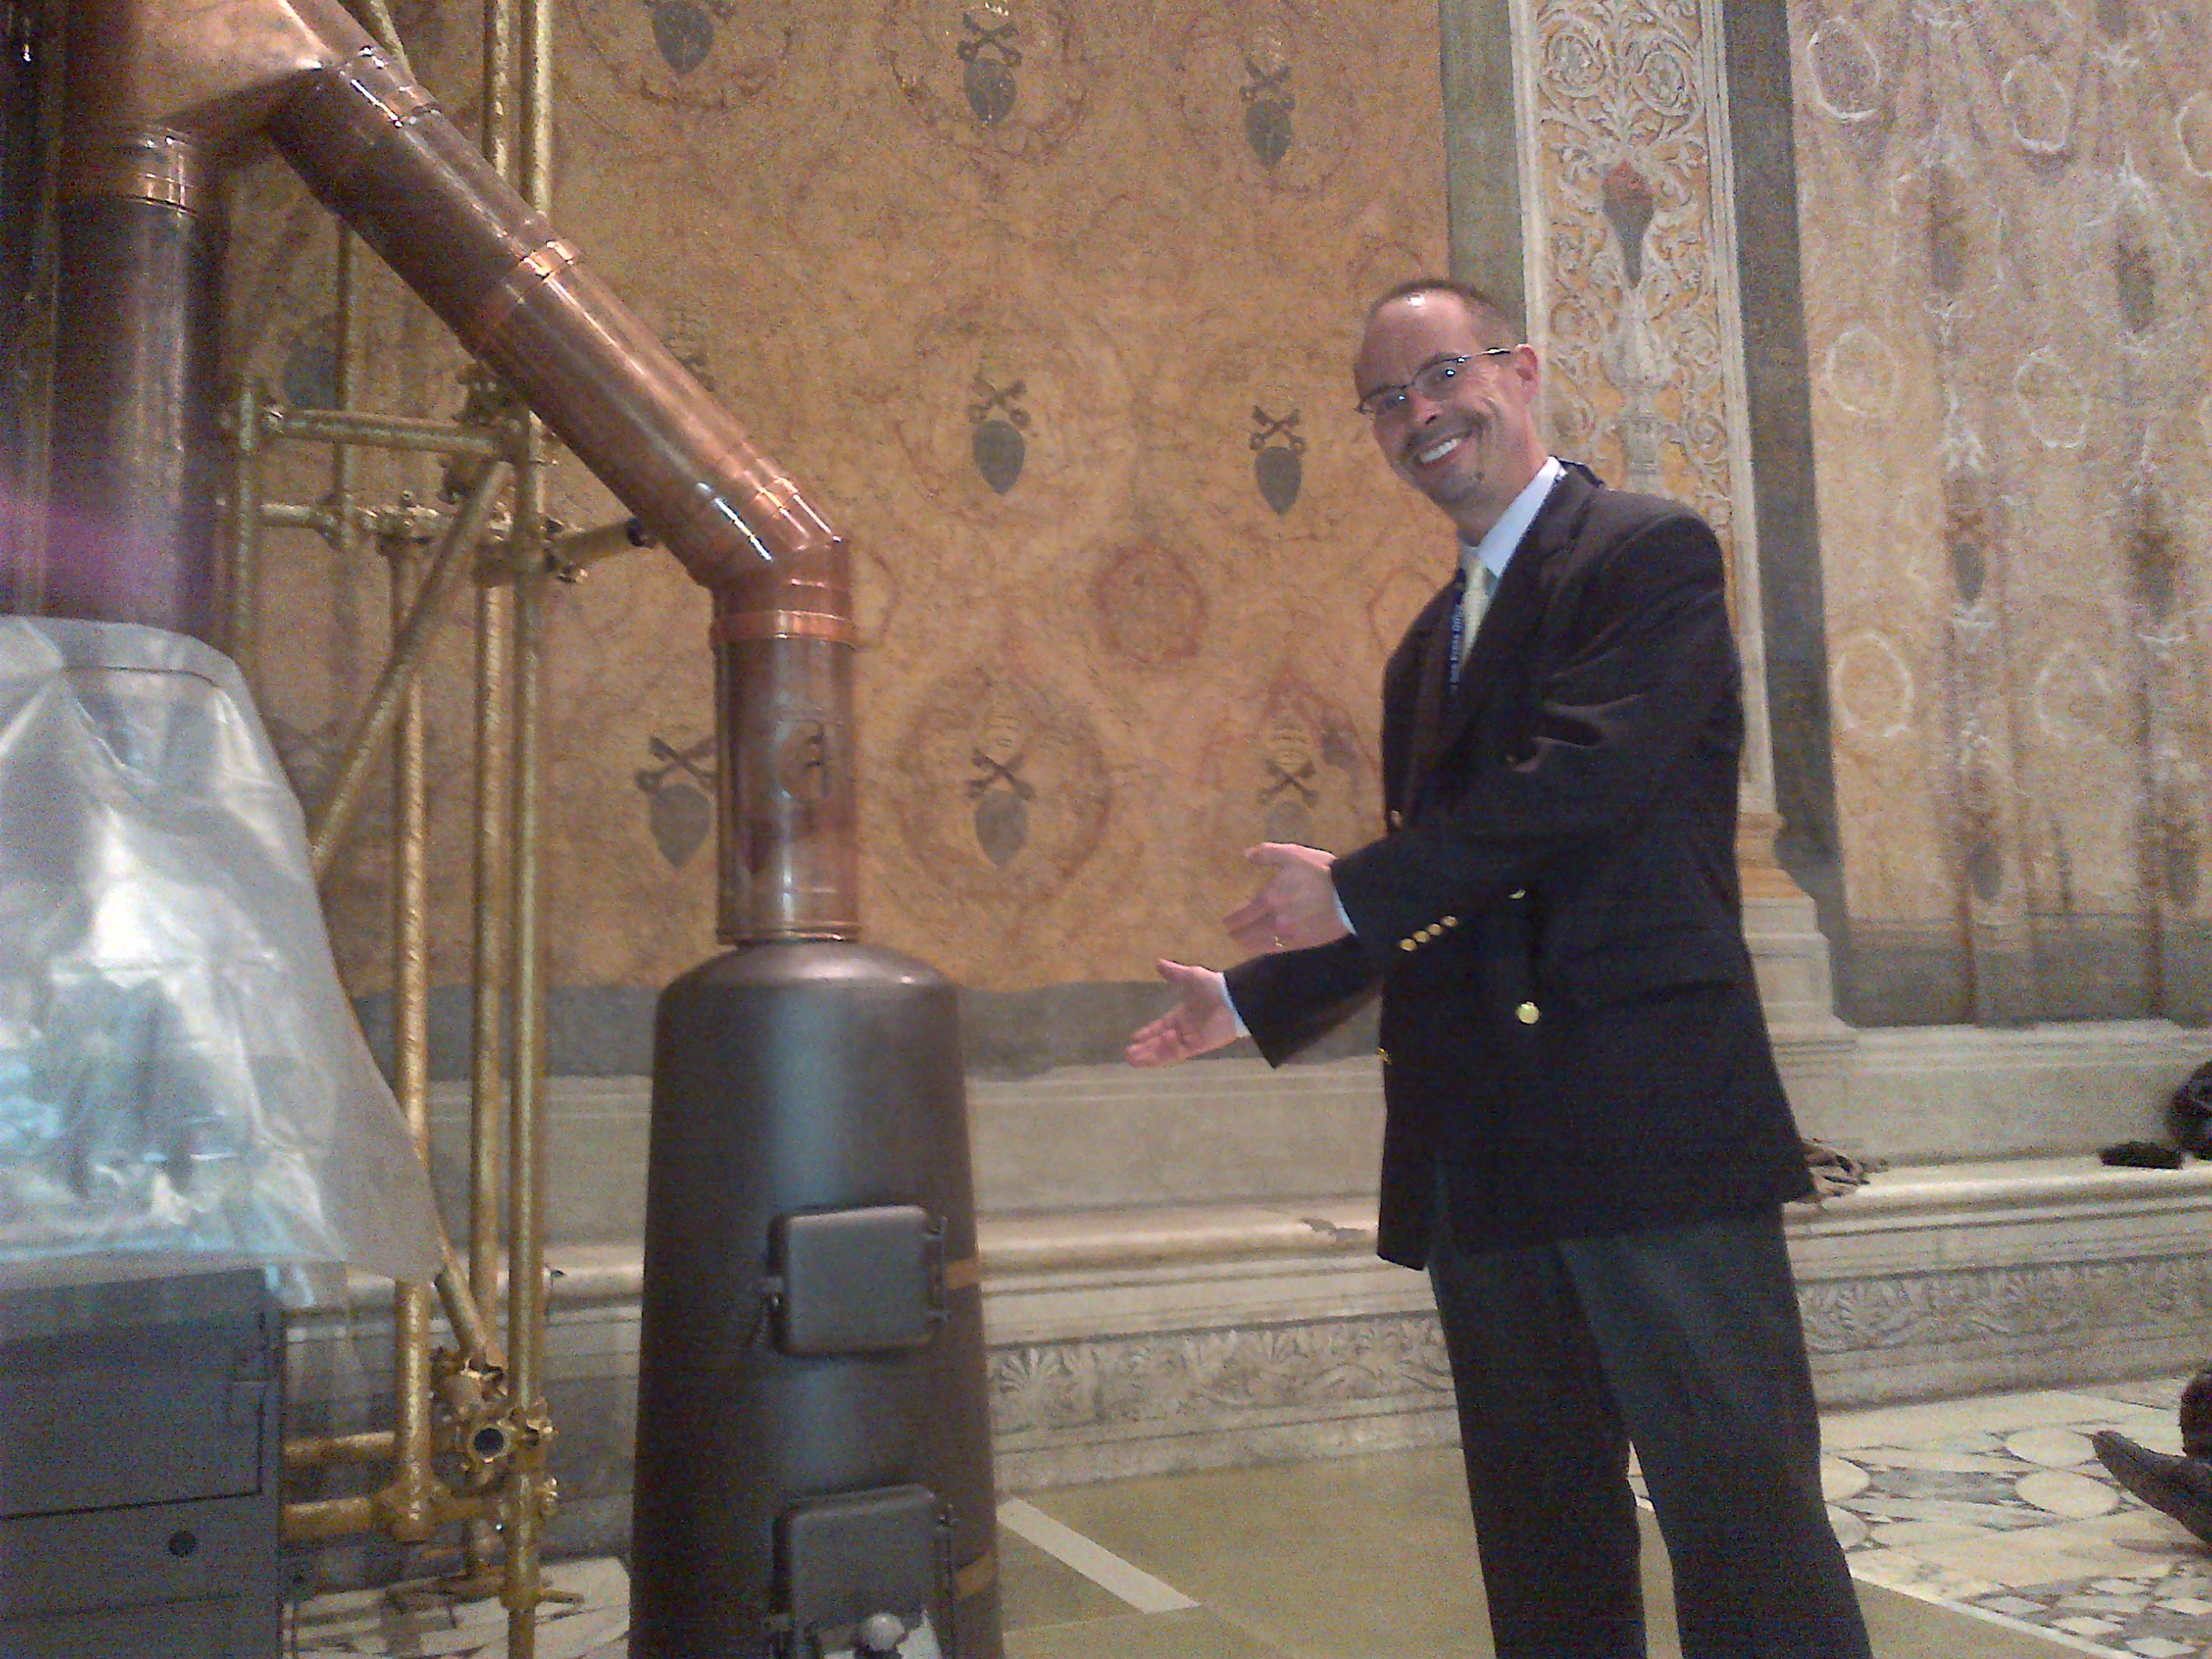 NCR senior correspondent John Allen shows off the famous stove in the Sistine Chapel